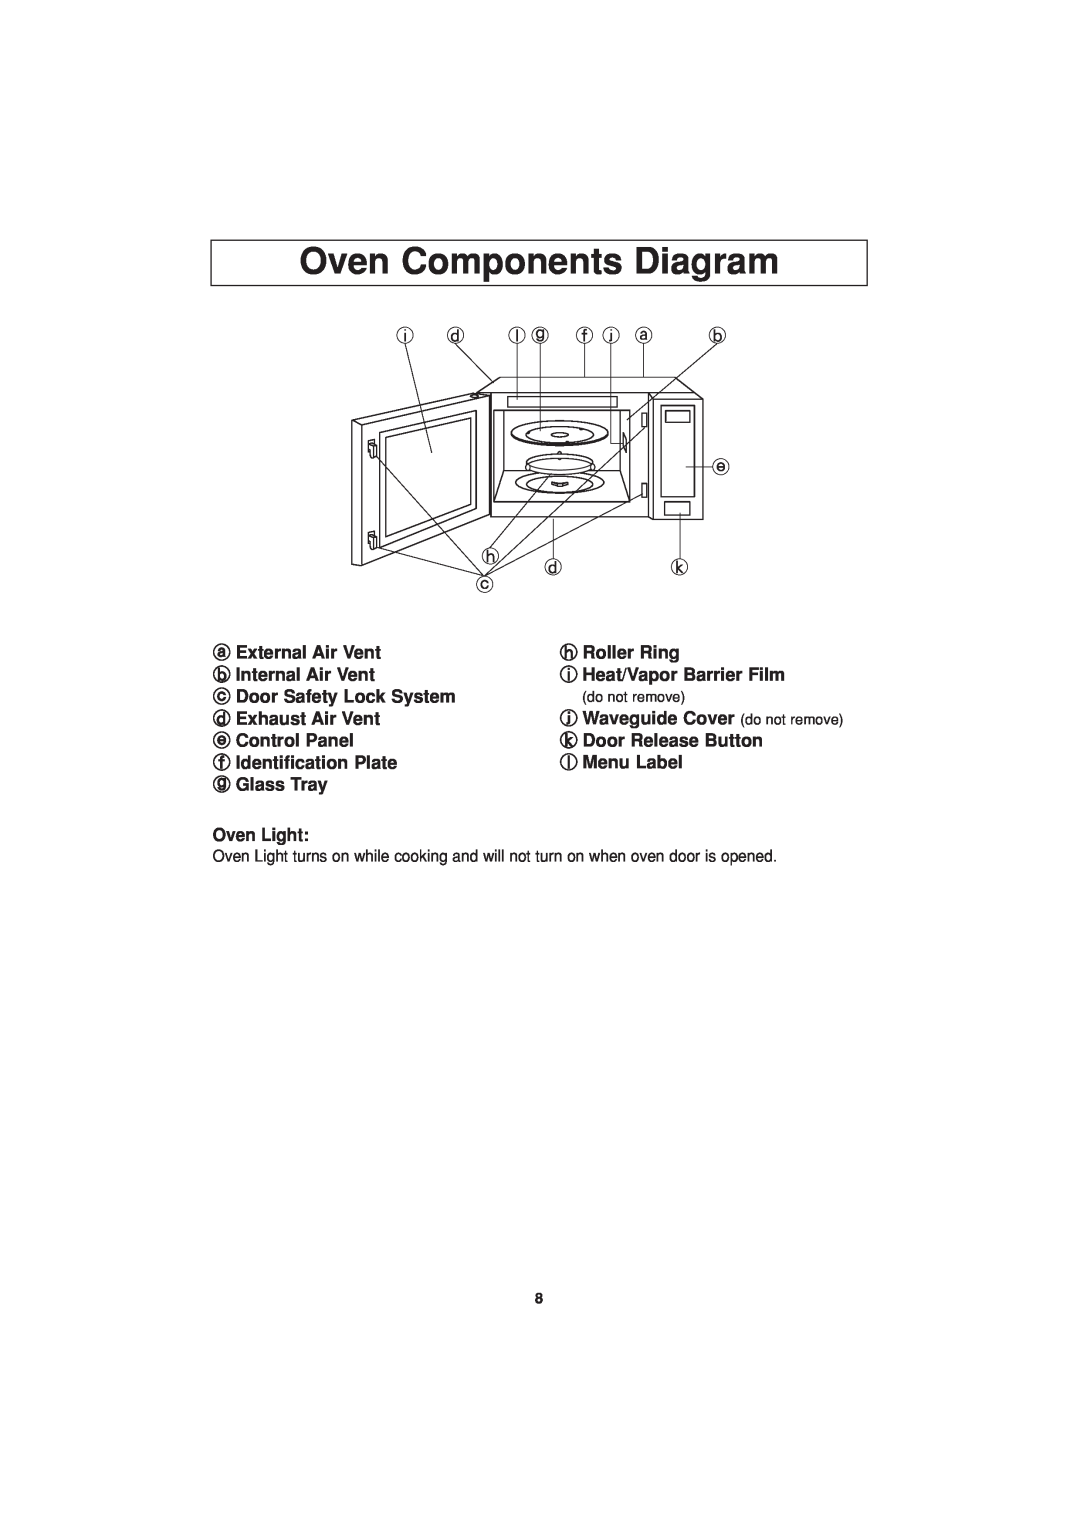 Panasonic NN-T694 operating instructions Oven Components Diagram 